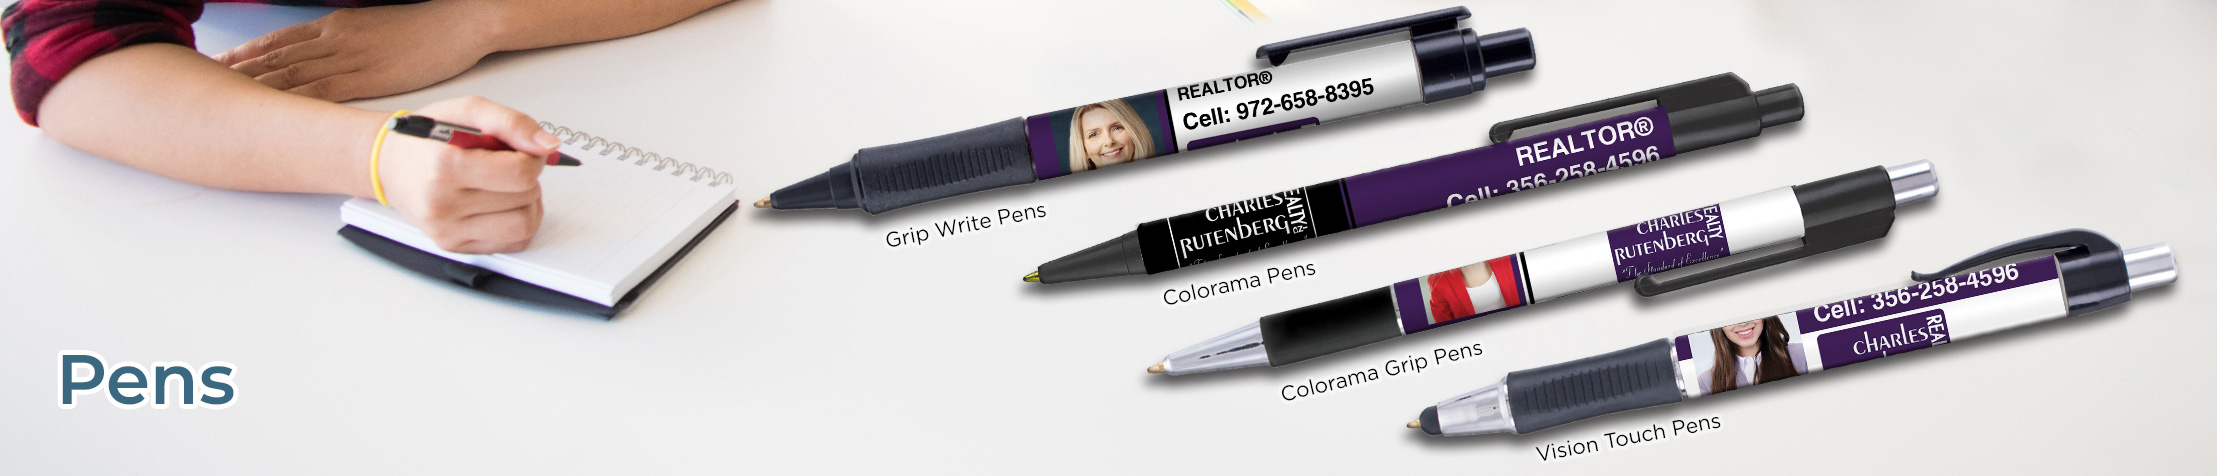 Charles Rutenberg Real Estate Personalized Pens - promotional products: Grip Write Pens, Colorama Pens, Vision Touch Pens, and Colorama Grip Pens | BestPrintBuy.com